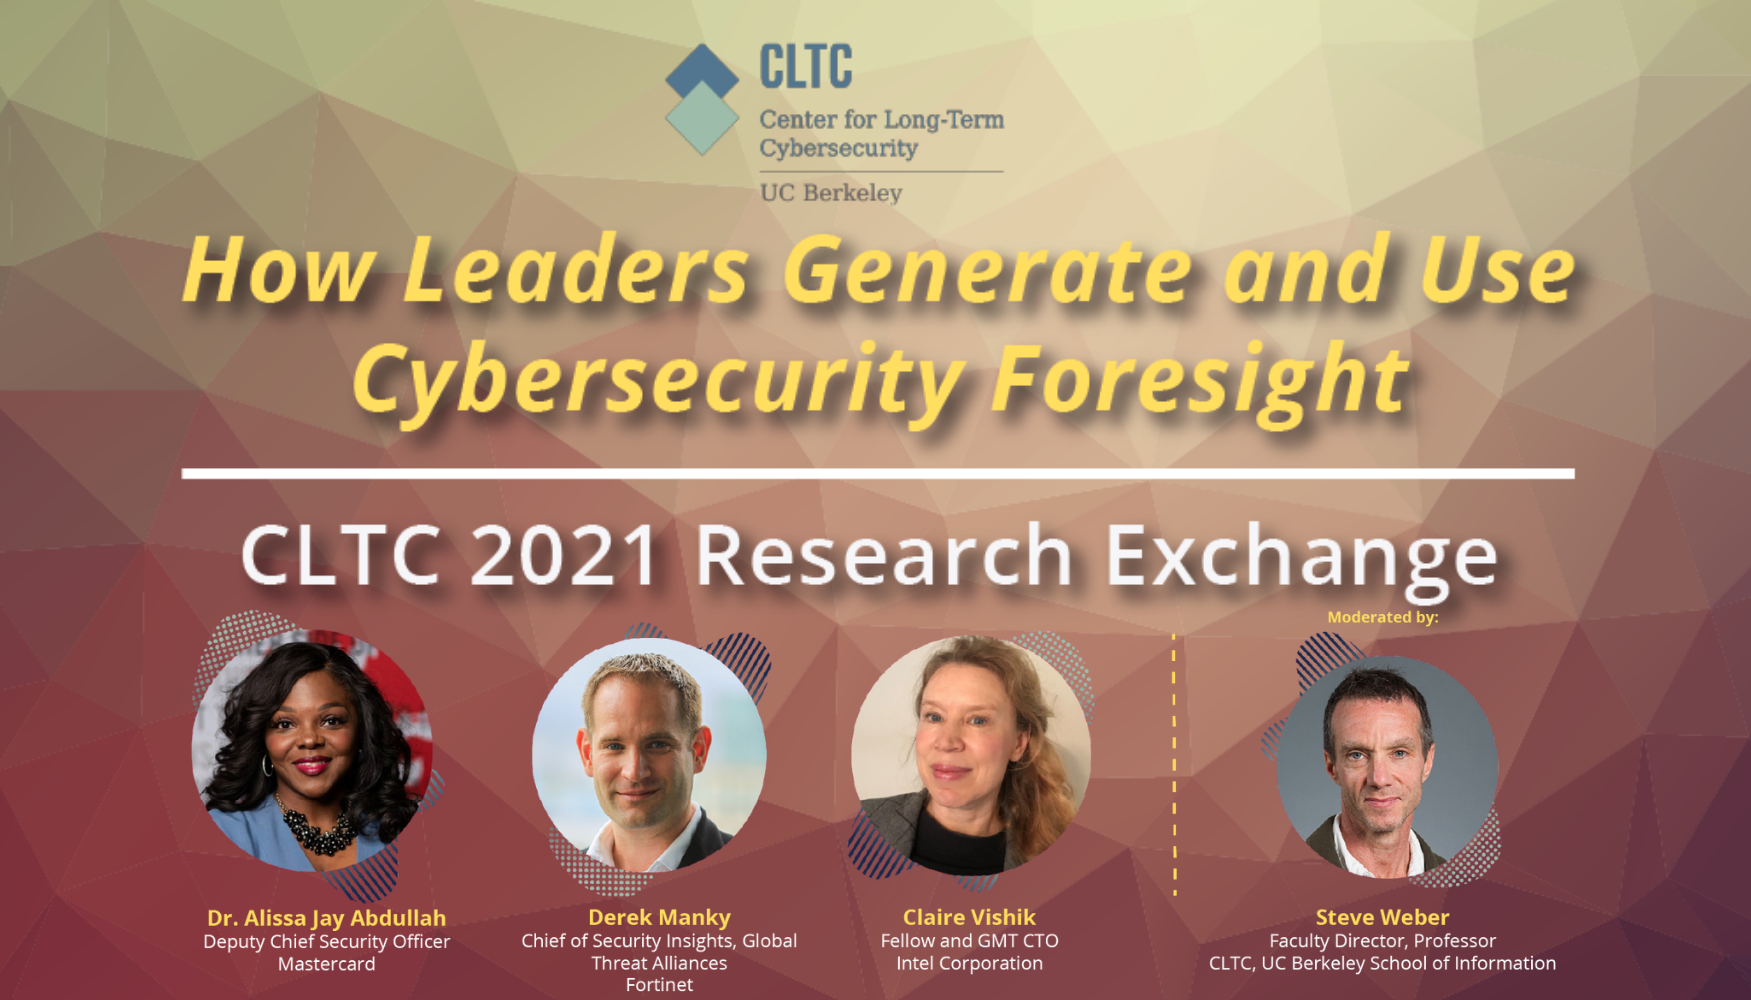 "How Leaders Generate and Use Cybersecurity Foresight"